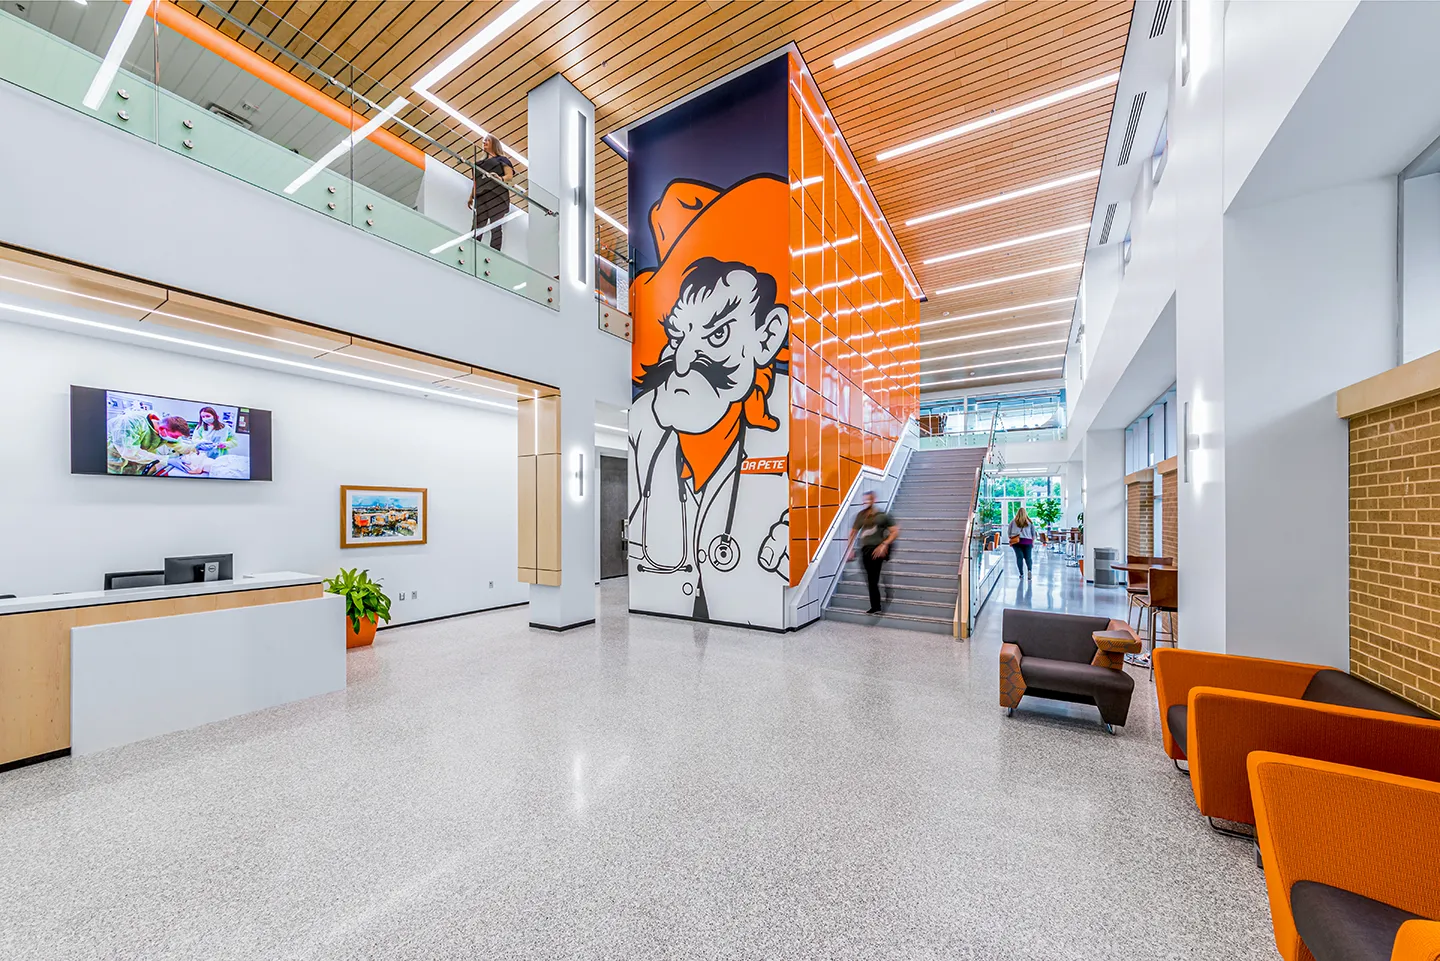 The lobby’s elevator reinforces branding and campus pride, becoming a welcoming entrance focal point accented with bold color patterns and LED lighting.